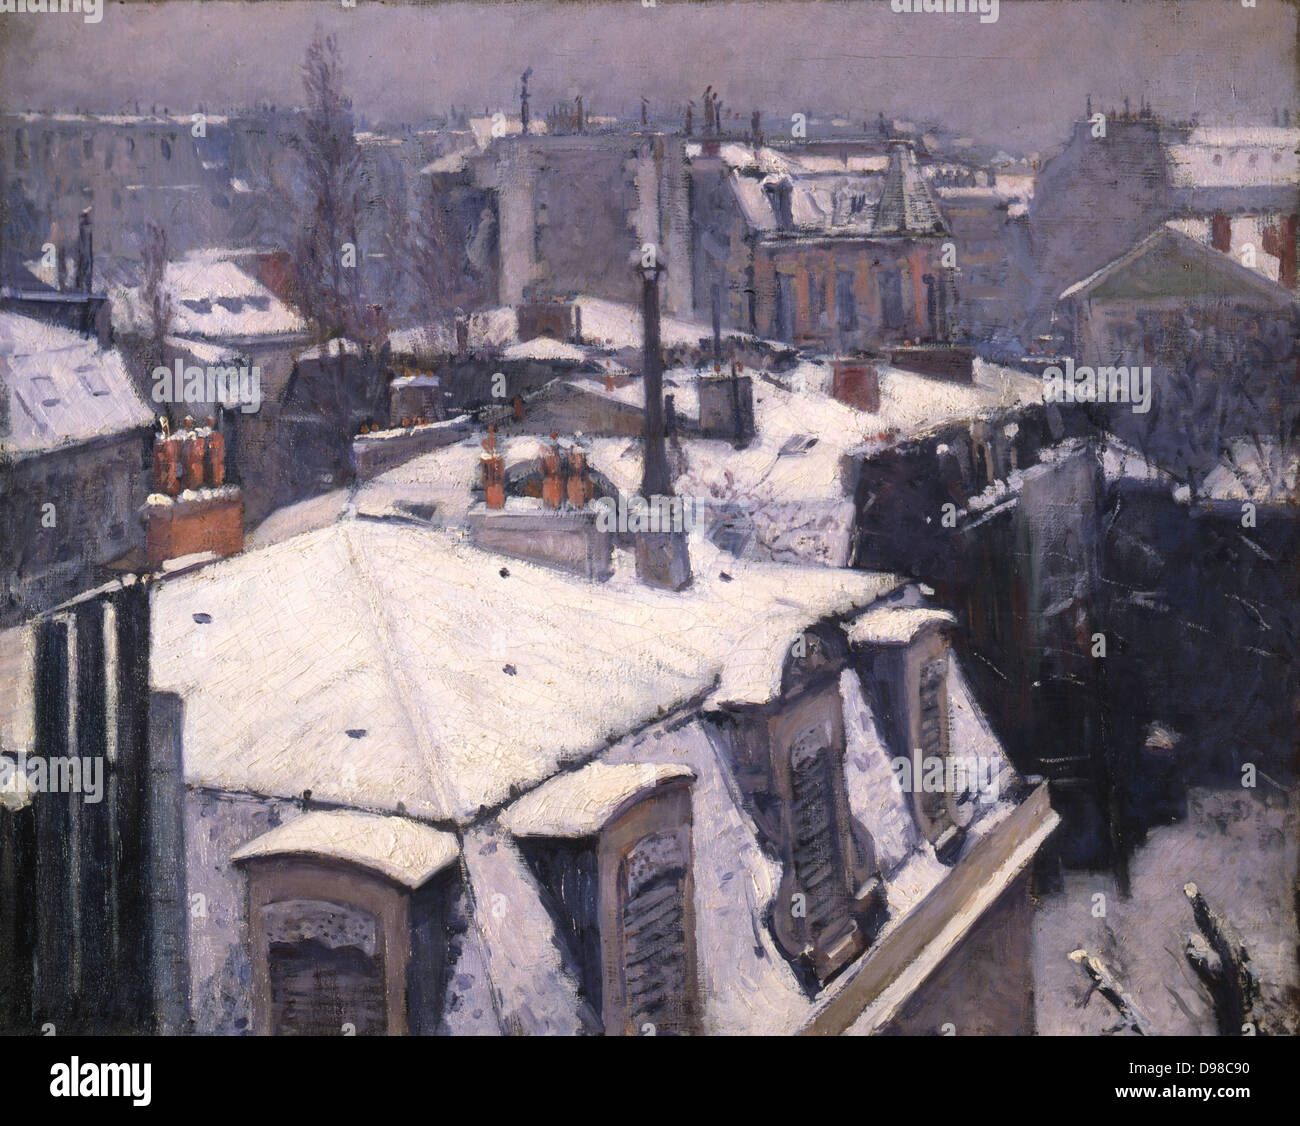 Tetti in Snow" 1878. Gustave Caillebotte (1848-1894) francese pittore impressionista. Foto Stock